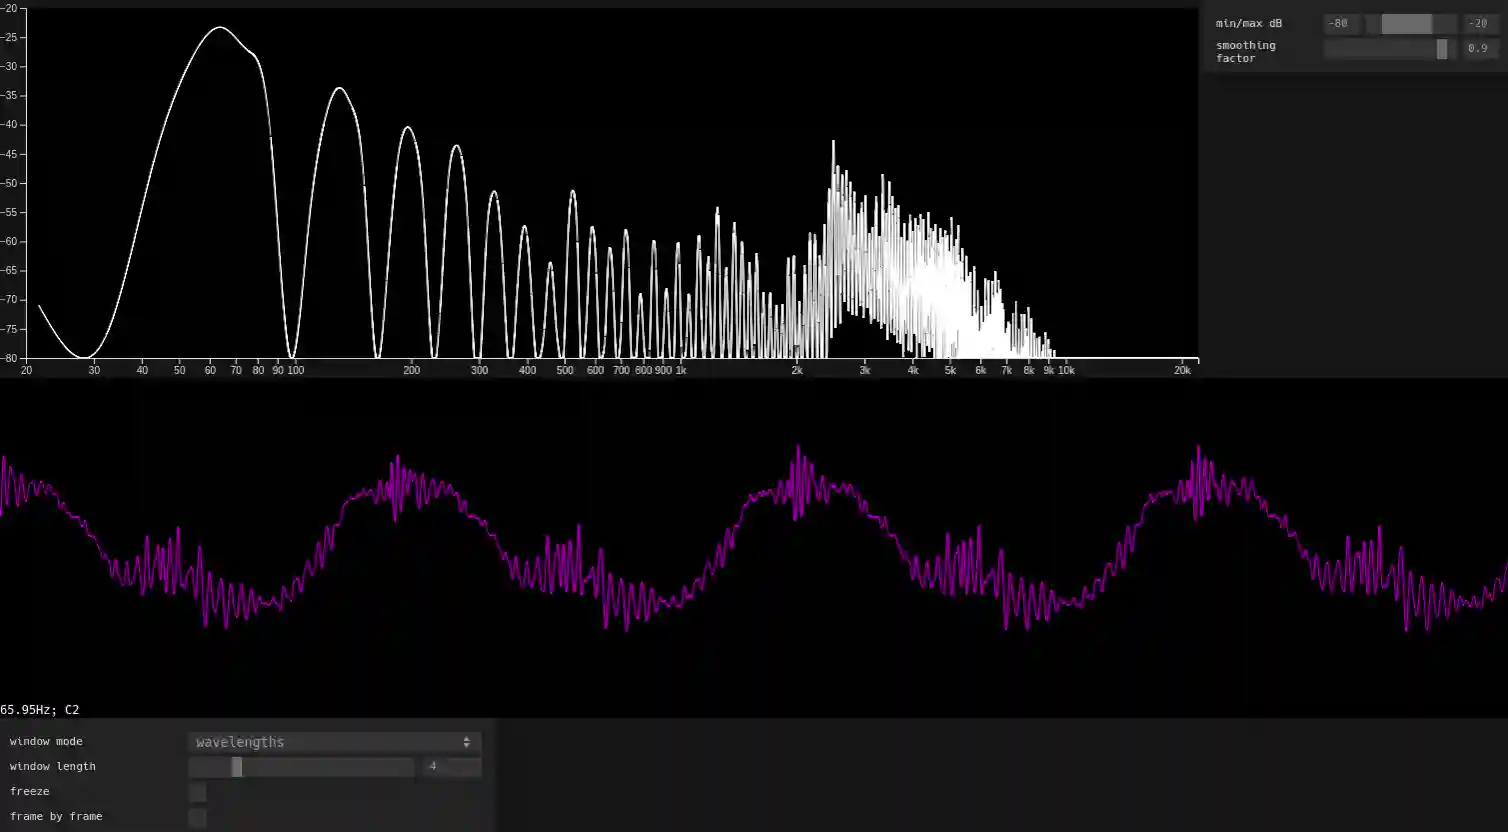 A screen recording of the signal analyzer module in web synth.  It shows a spectrogram rendered as a white line on top, and an oscilloscope rendered as a magenta line on the bottom.  Both the visualizations are animated to reflect changes in the signal as it changes over time. The spectrogram shows a complex spectrum with lots of harmonics, tapering off slightly into the higher frequencies. The oscilloscope shows a complex waveform that drifts off slowly to the left.